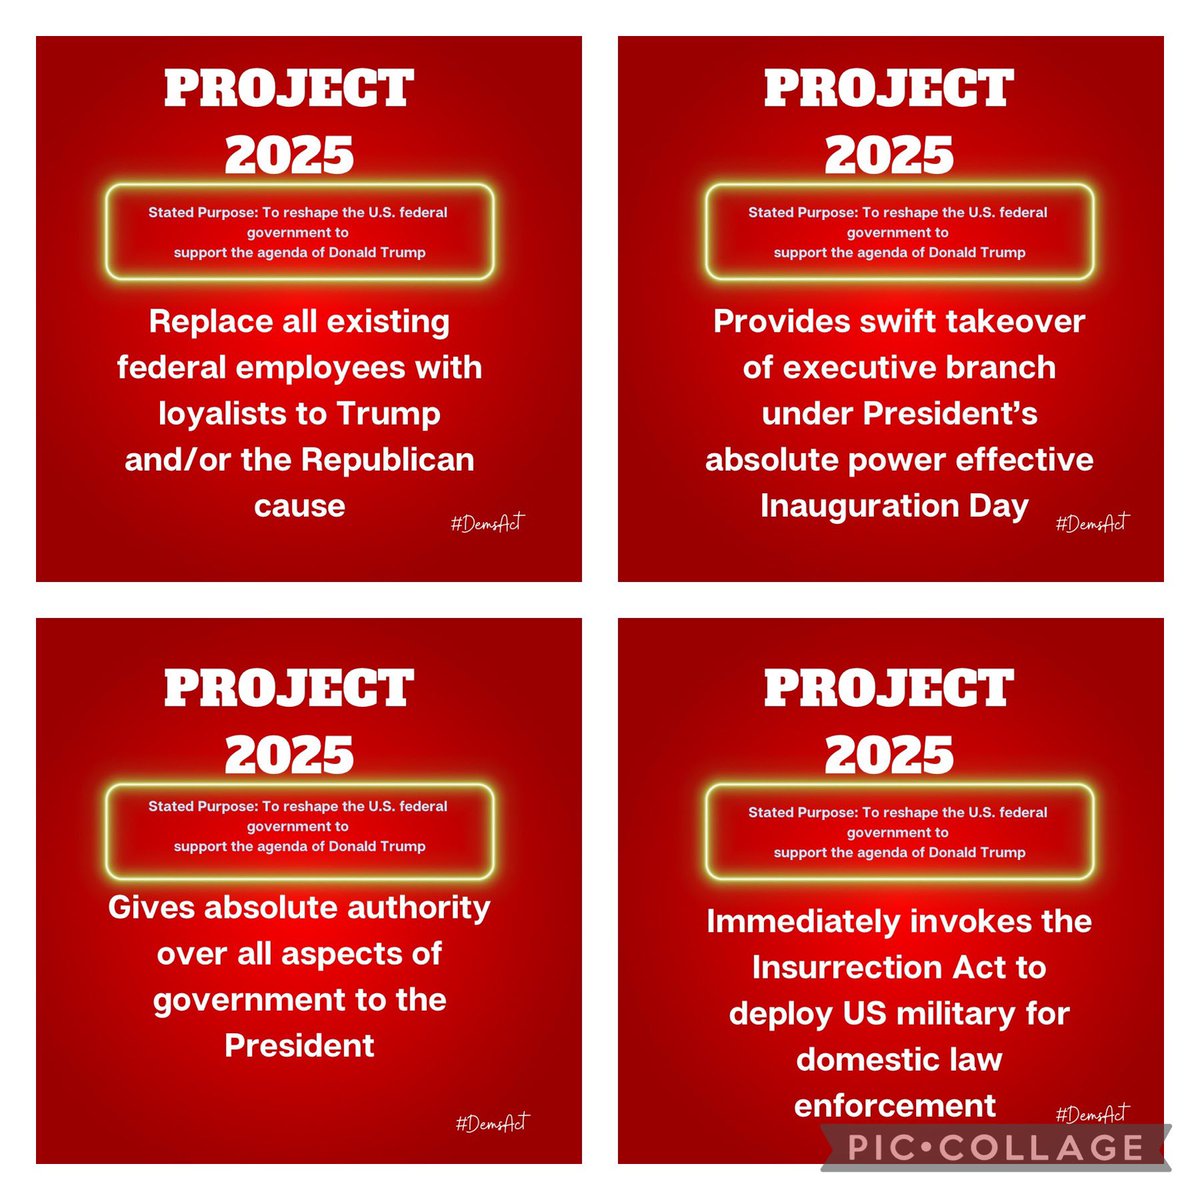 🚨🚨🚨#wtpBlue #wtpGOTV24 Do your best to make sure everyone knows about #Project2025  pbs.org/newshour/polit…